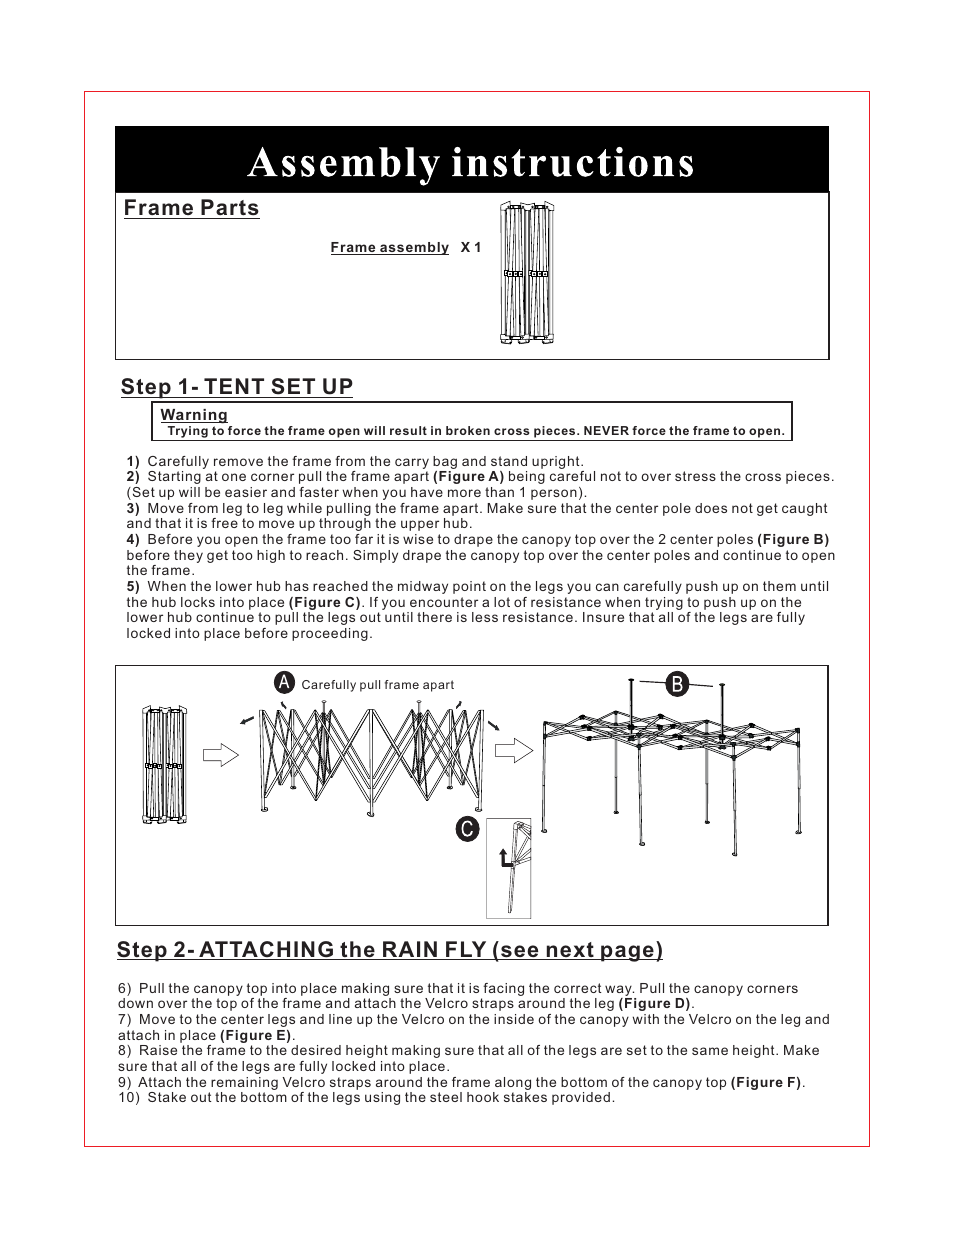 Step 1- tent set up frame parts, Step 2- attaching the rain fly (see next page) | Giga Tent GT 004W User Manual | Page 2 / 8